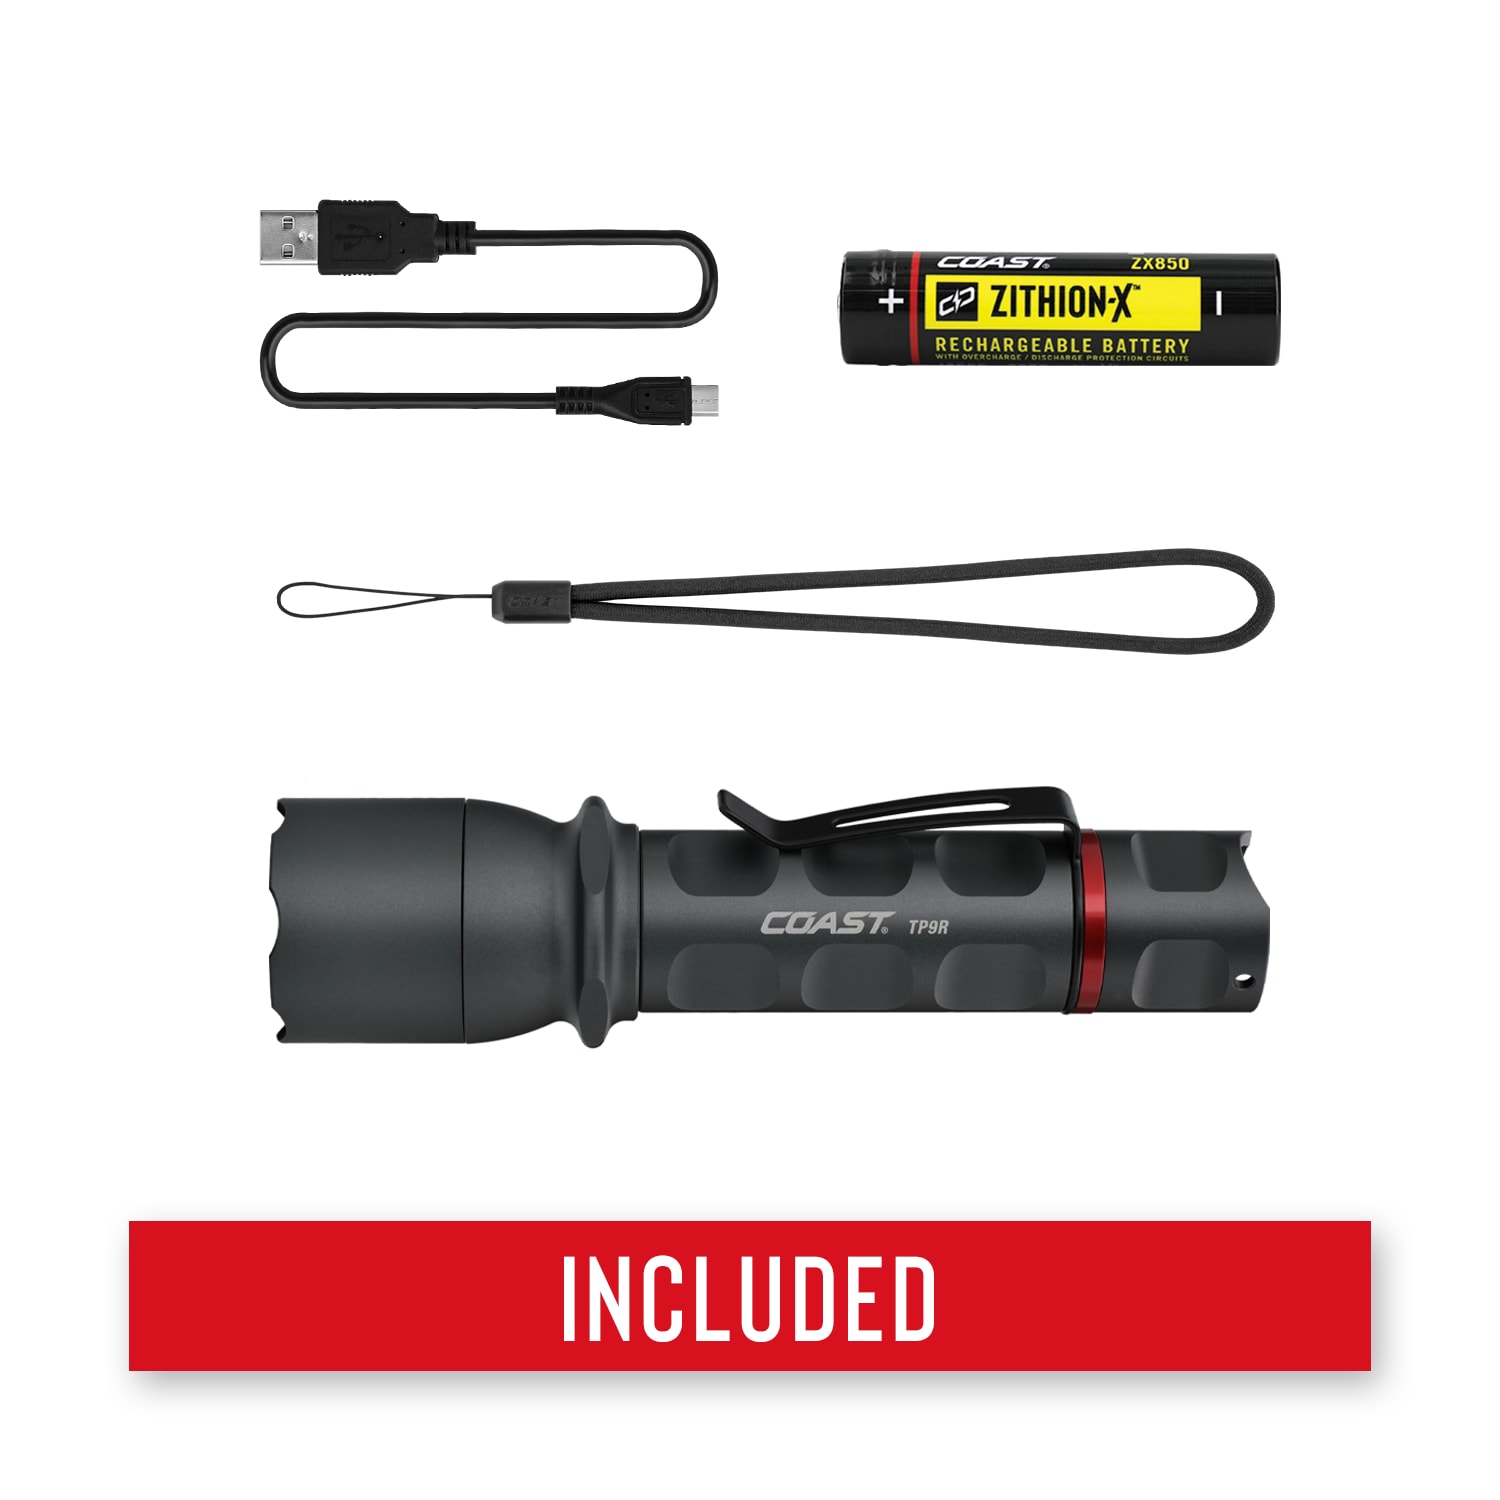 Coast TP9R Professional 1000-Lumen Modes LED Rechargeable Flashlight (Lithium Ion (3.7V) Battery Included) in the at Lowes.com